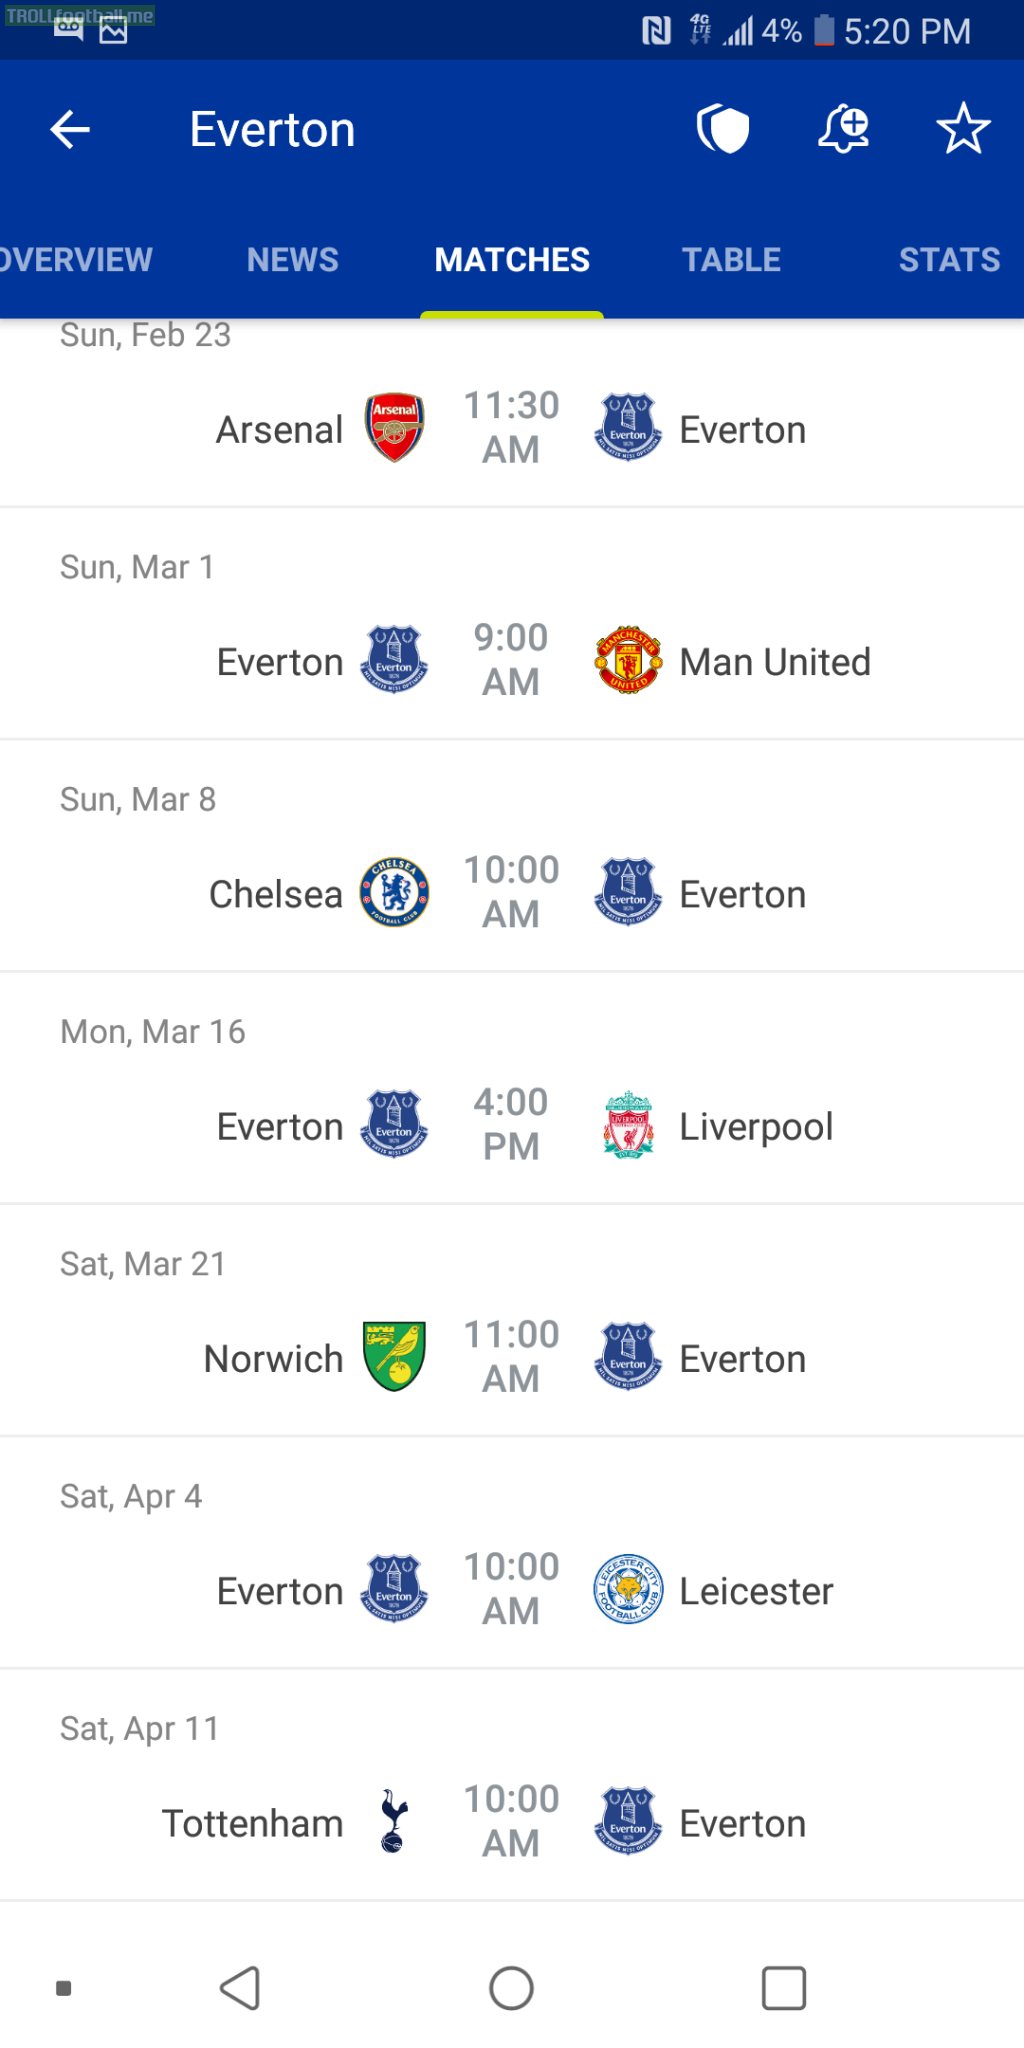 Everton's next 7 matches include Arsenal (A), Manchester United (H), Chelsea (A), Liverpool (H), Leicester City (H), and Tottenham (A).